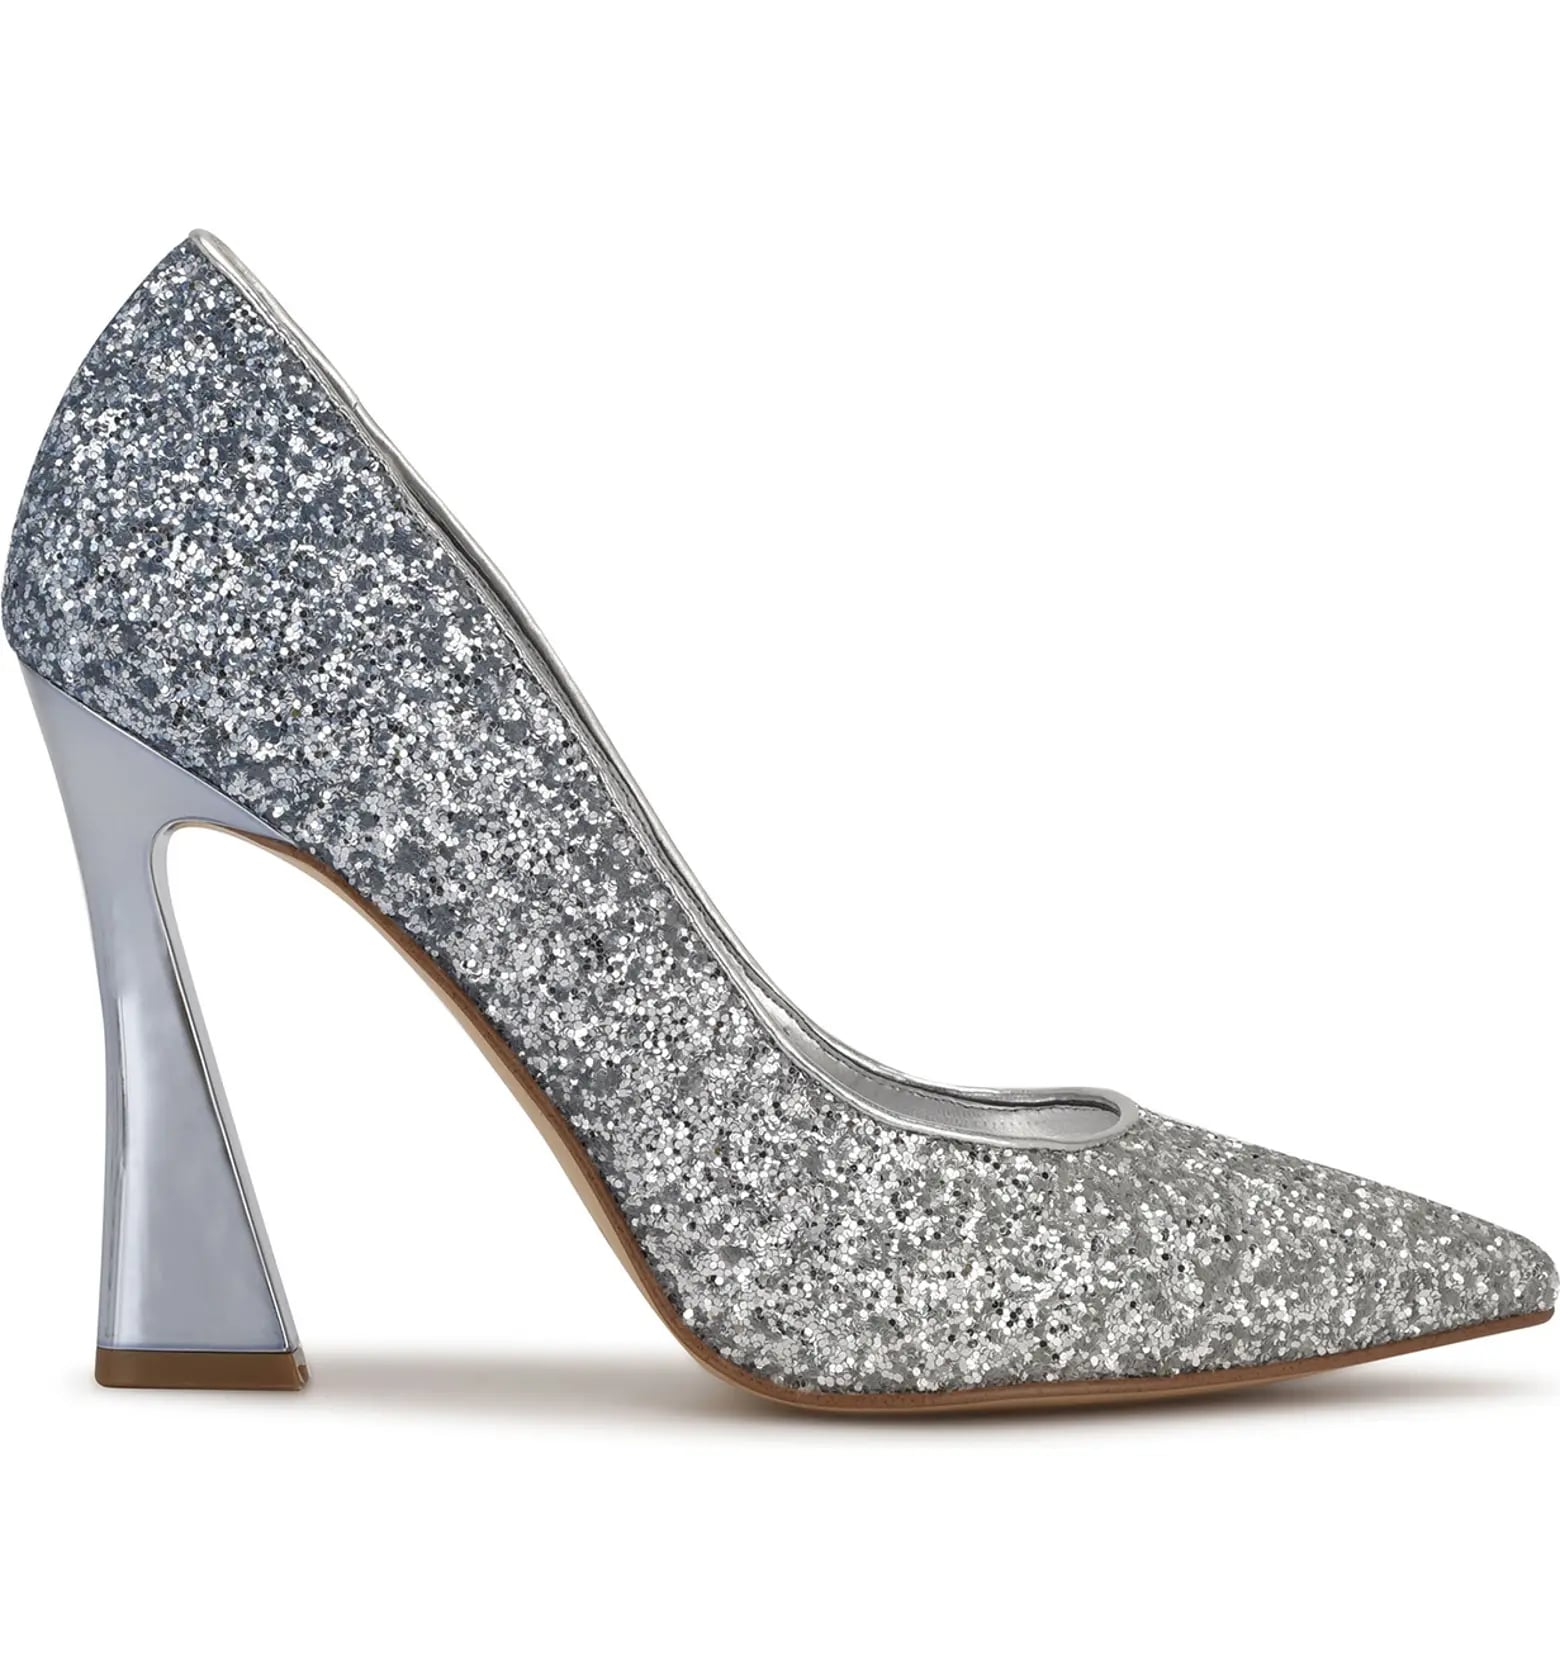 15 Party Dress & Shoes Combos To Try This December